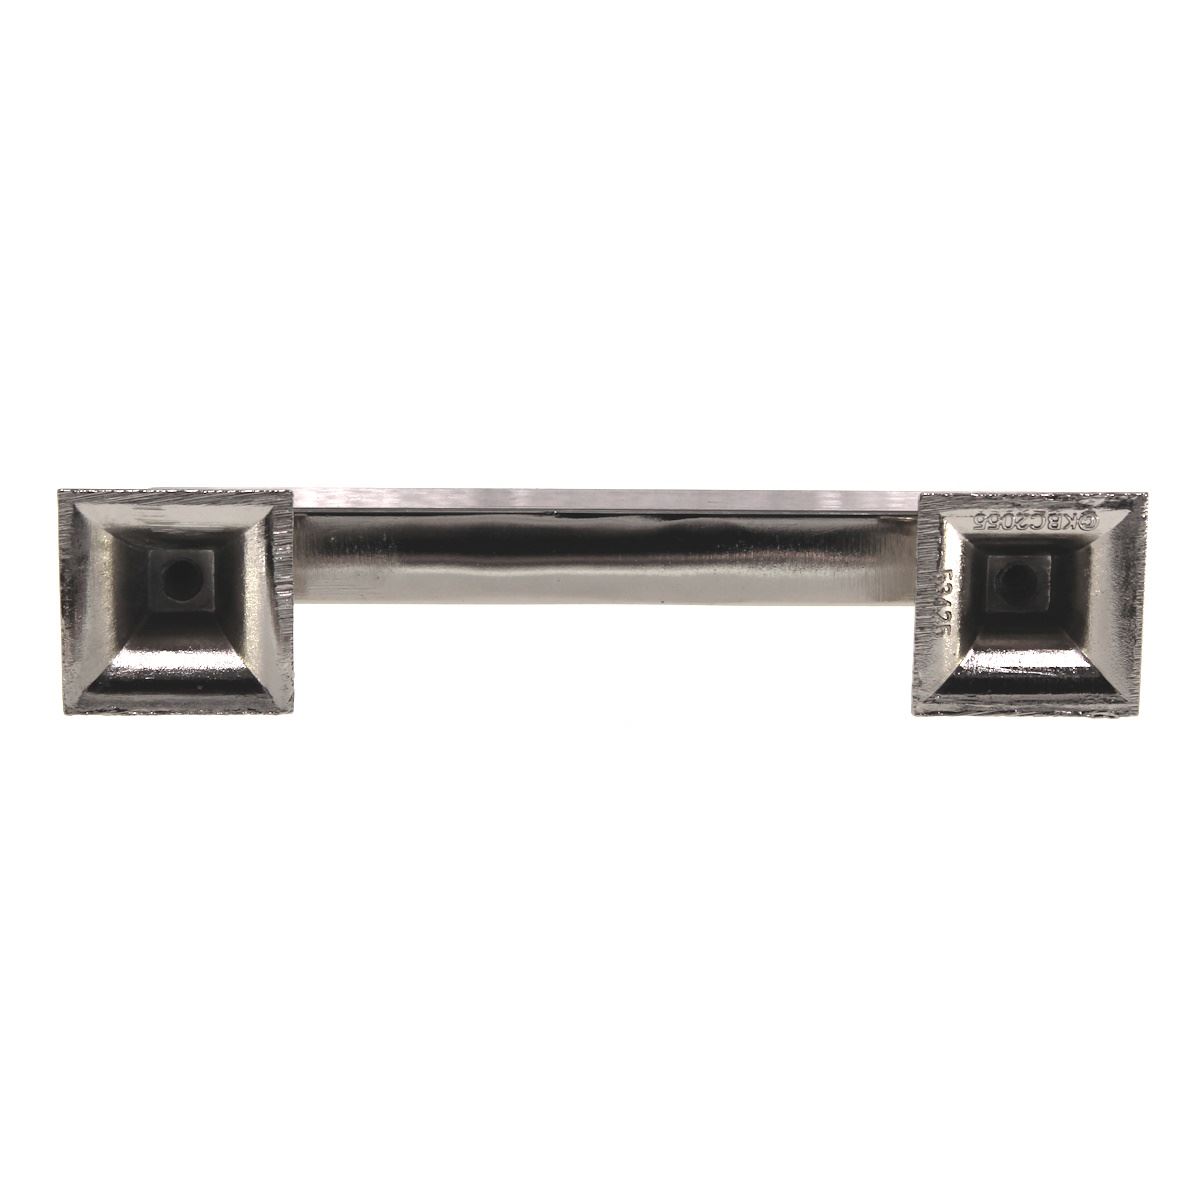 Hickory Hardware Studio 3 3/4 (96mm) Ctr Square Pull Polished Nickel